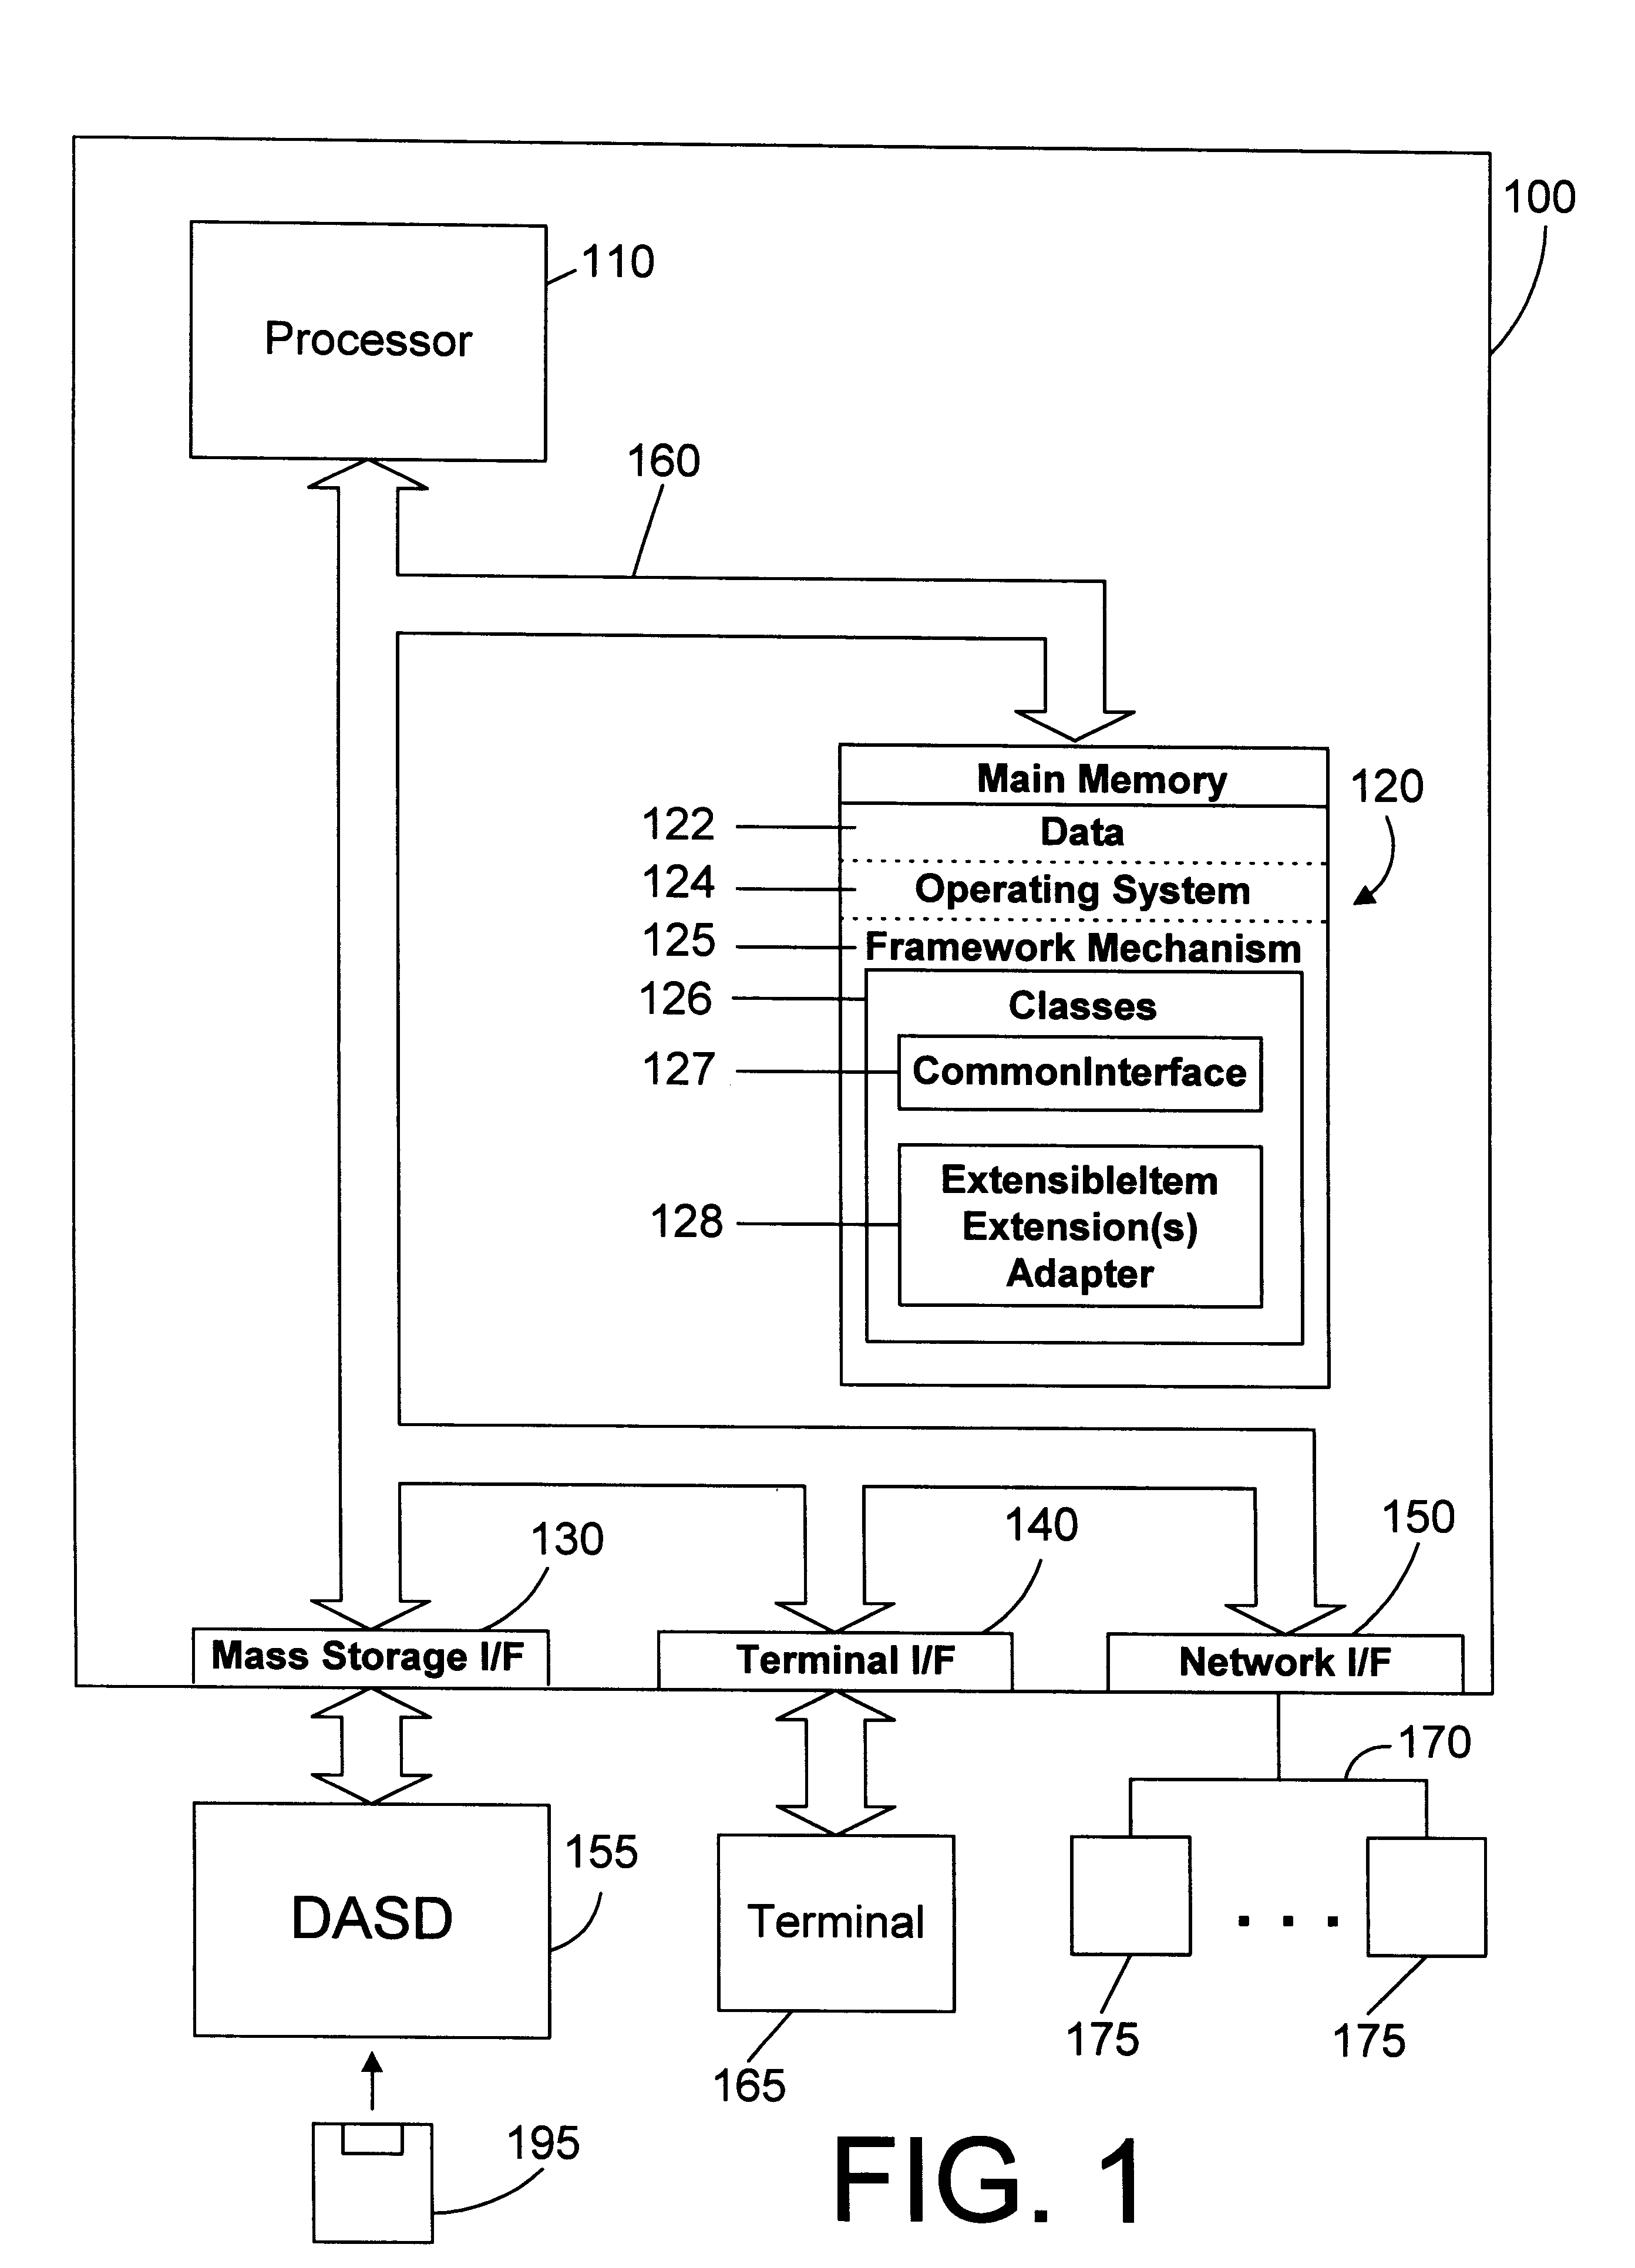 Interface mechanism and method for accessing non-object oriented data from within an object oriented framework